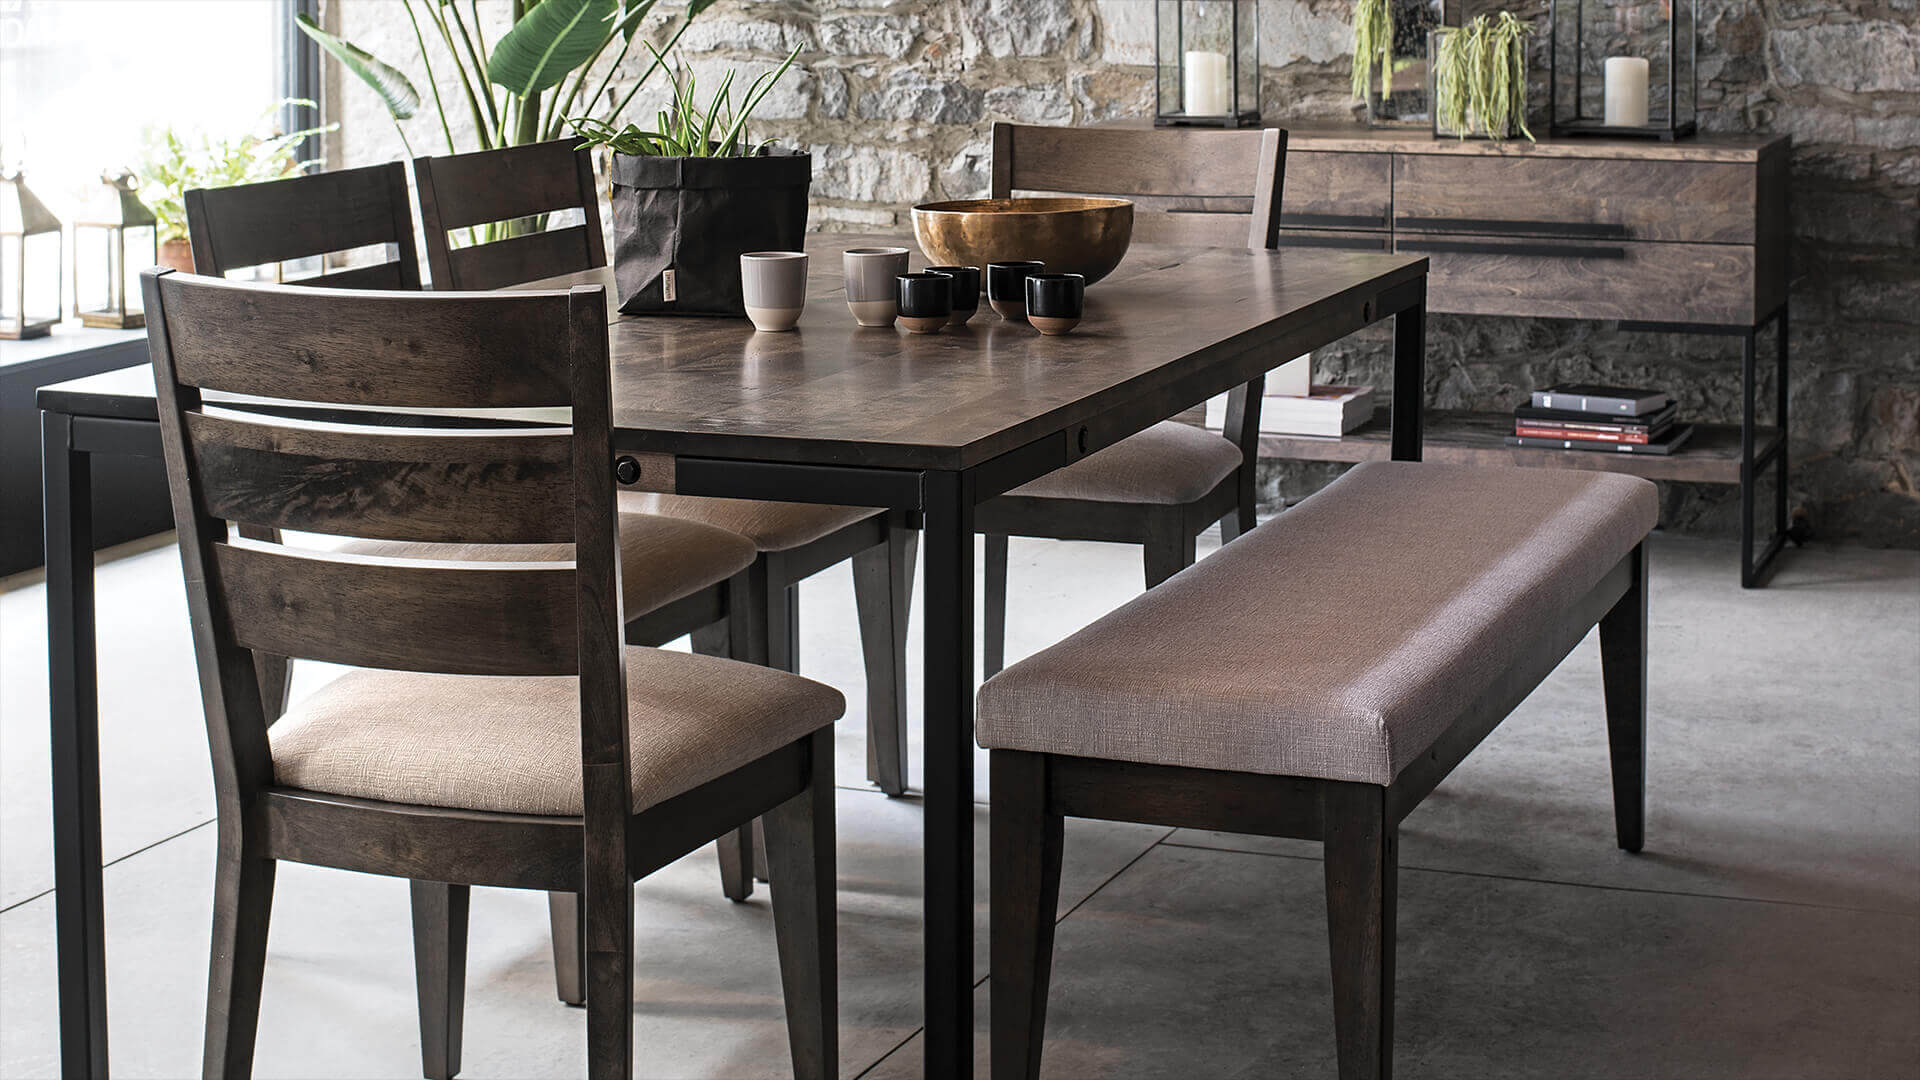 East Side Collection Wood And Metal Furniture Canadel intended for proportions 1920 X 1080